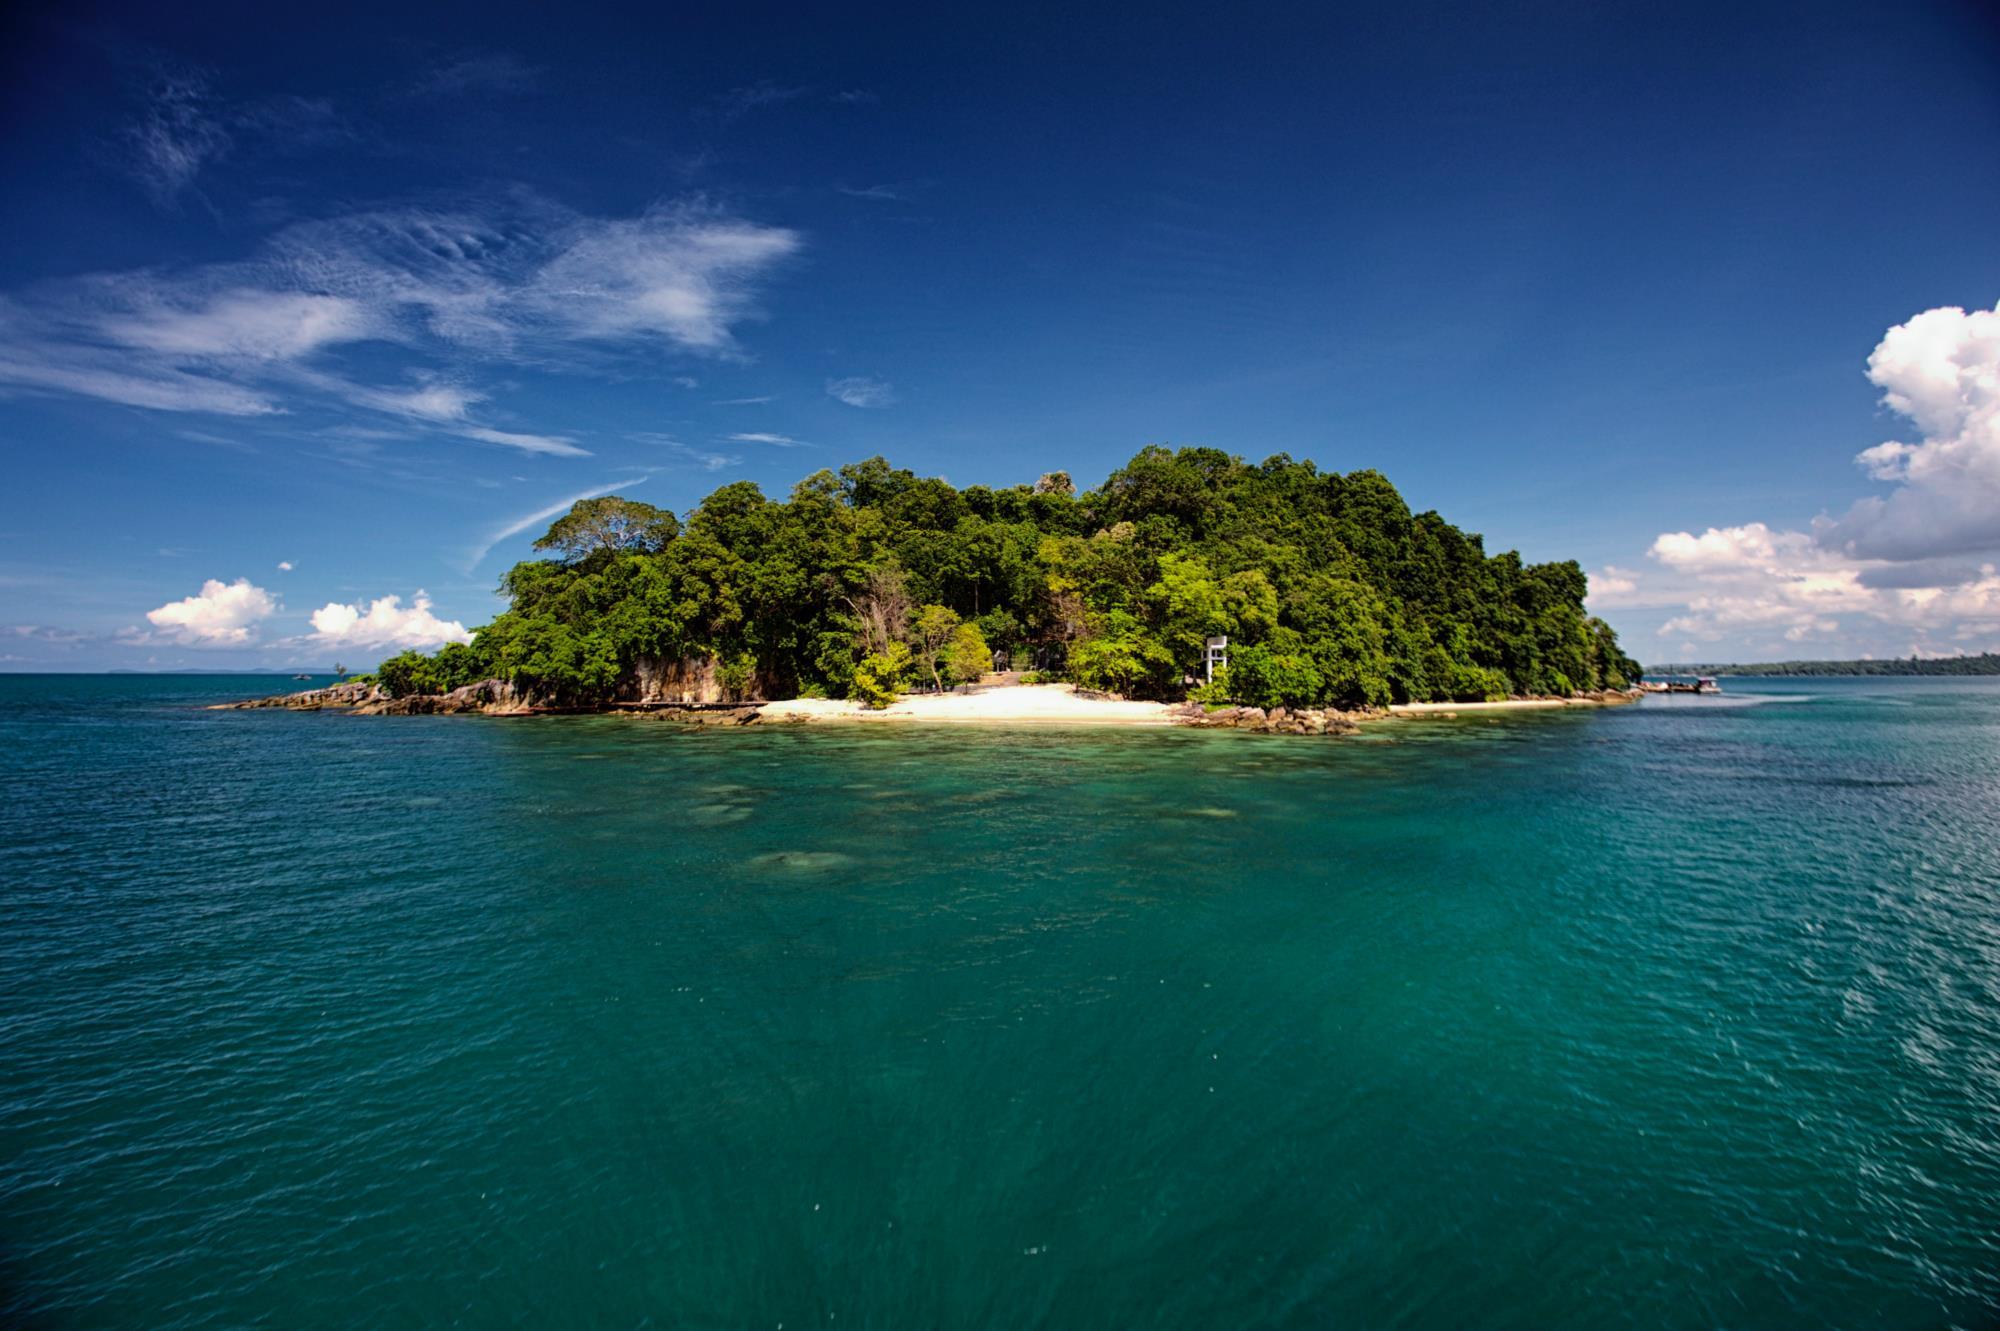 Set on its own 30-acre island, the Six Senses offers villa-only accommodation